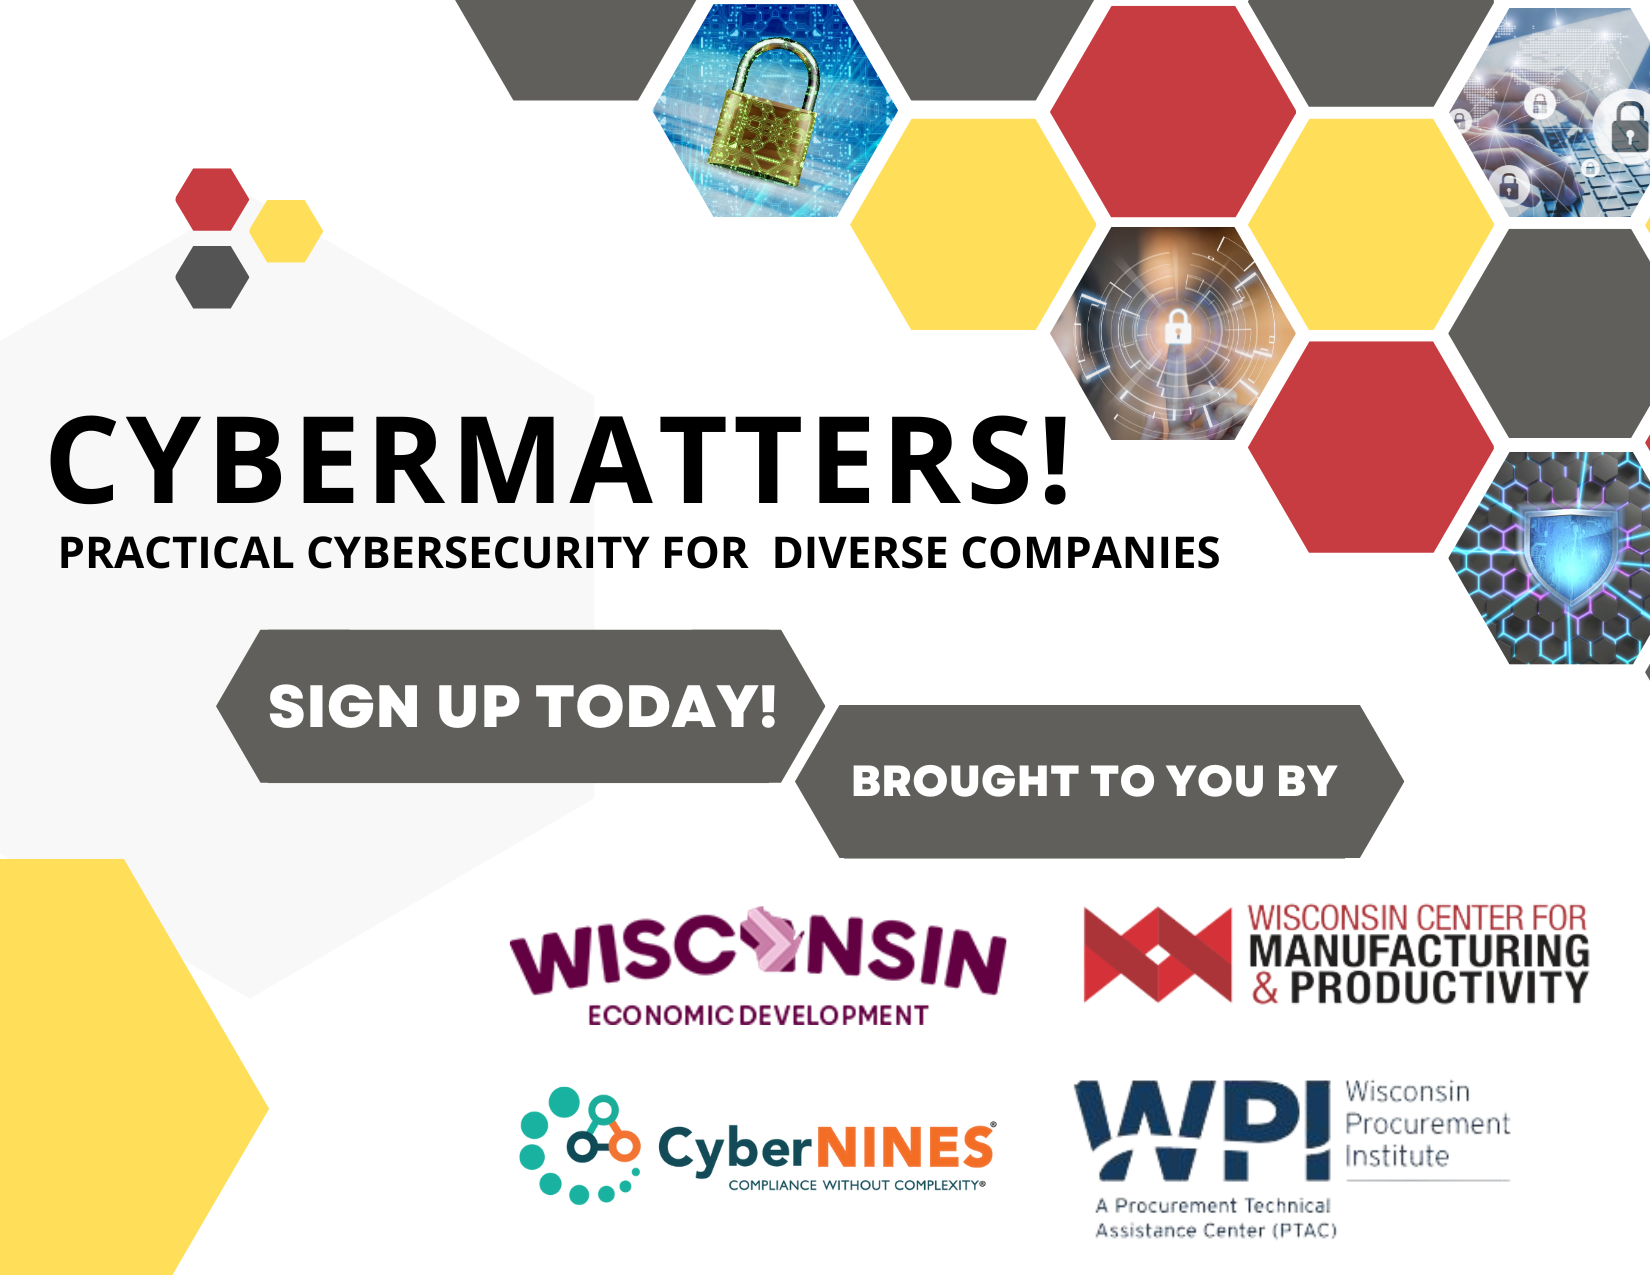 Cyber Matters! Practical cybersecurity for diverse companies. Sign up Today!